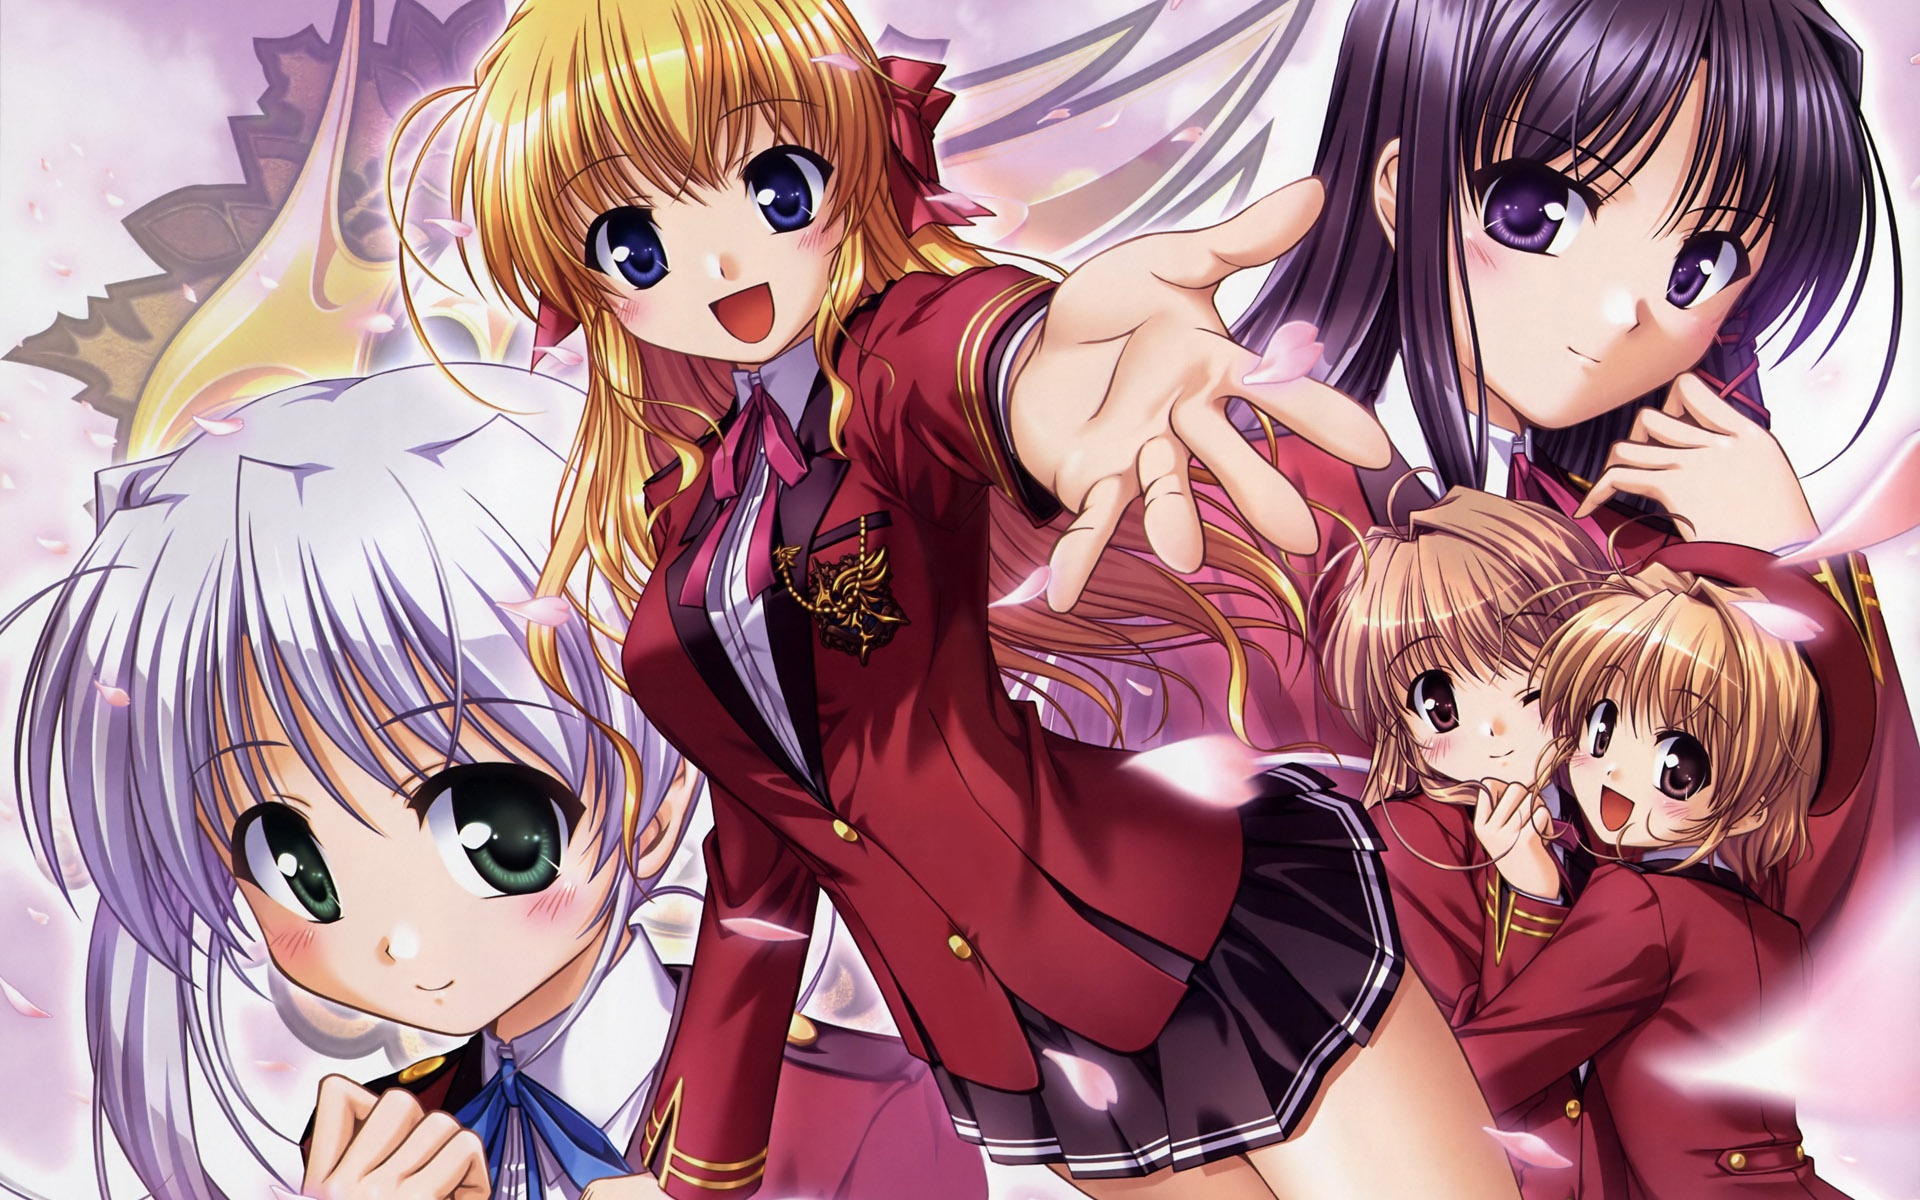 Wallpaper Cute Anime Girl With Big Eyes - Group Anime School Girls , HD Wallpaper & Backgrounds